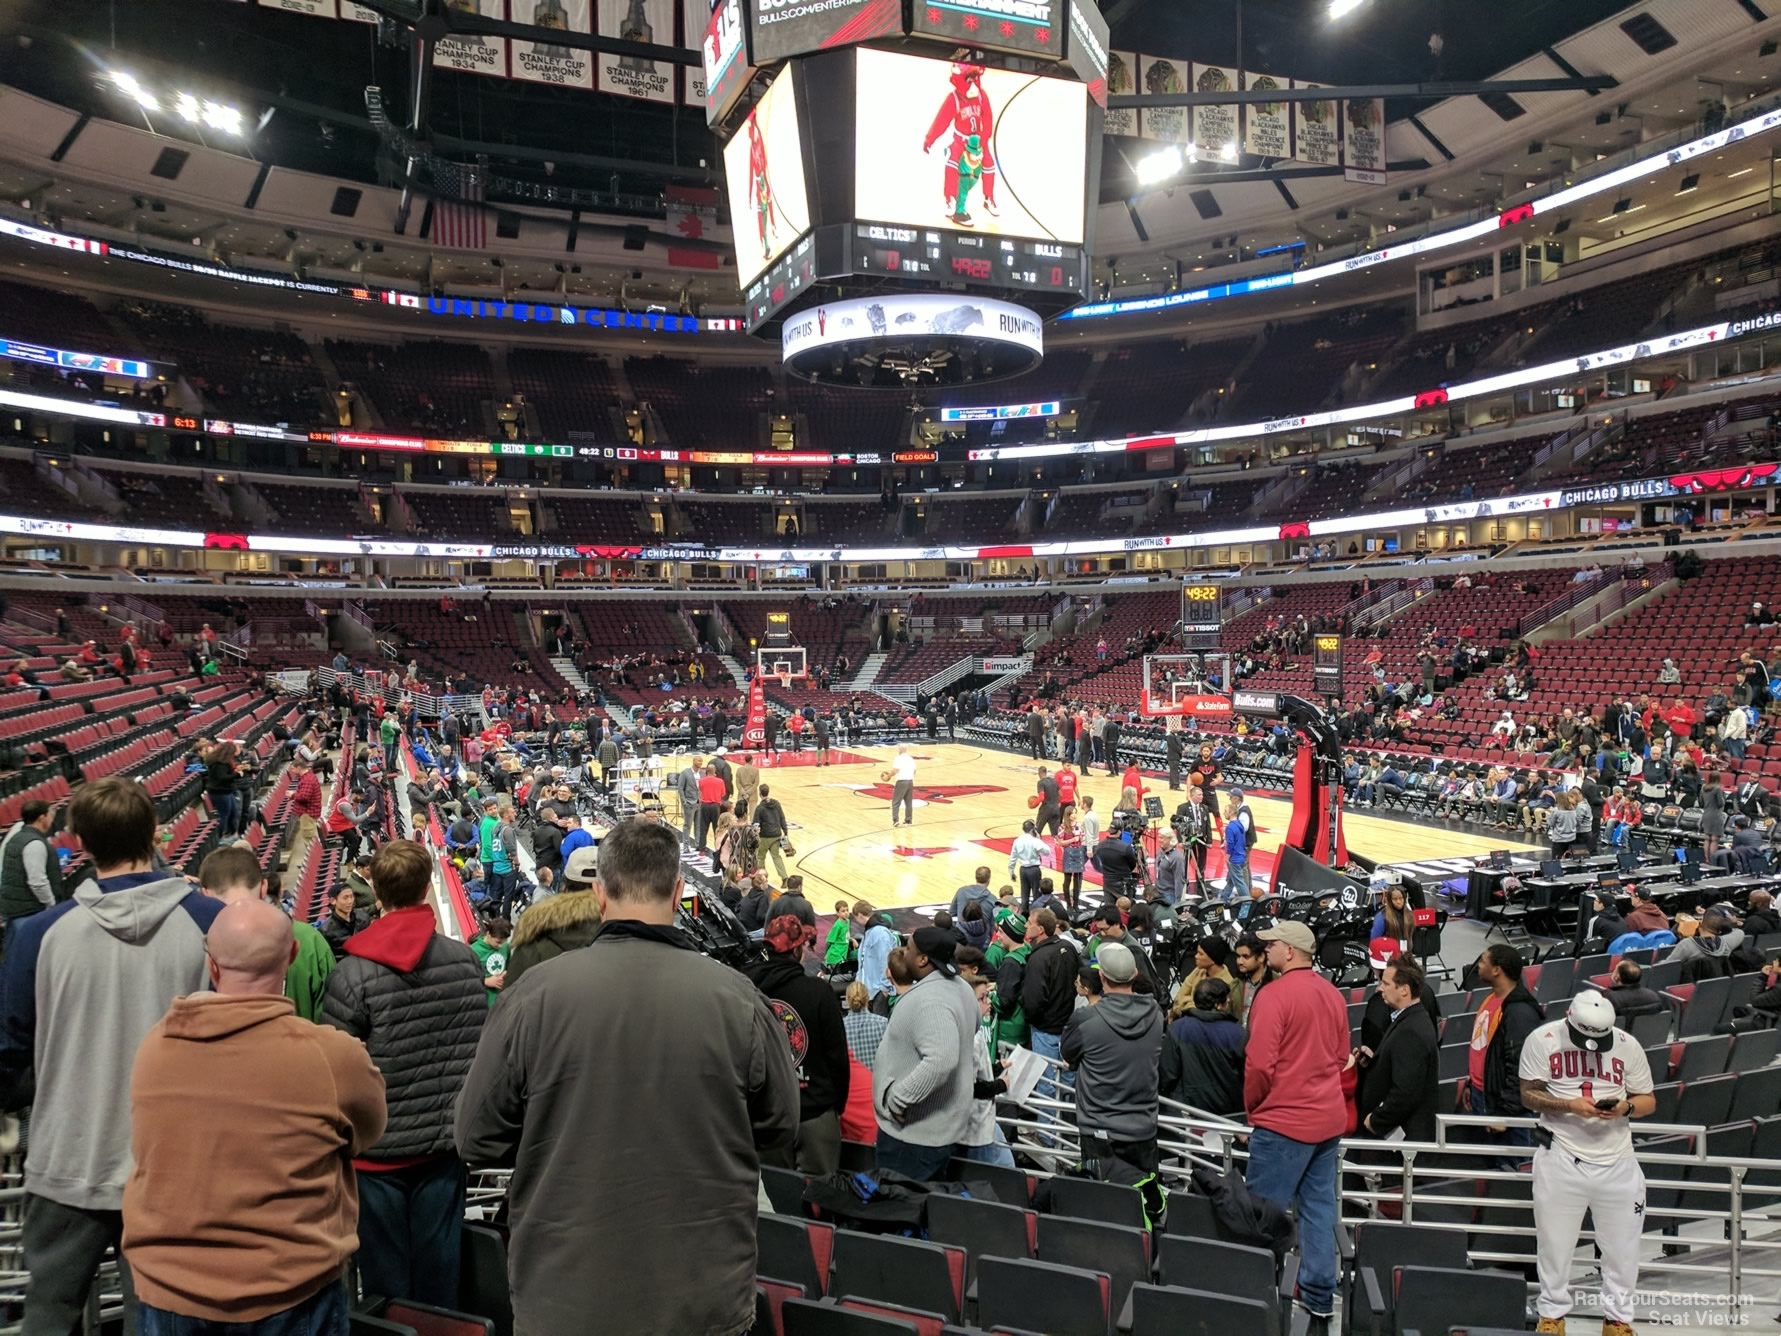 Section 119 at United Center - Chicago Bulls - RateYourSeats.com